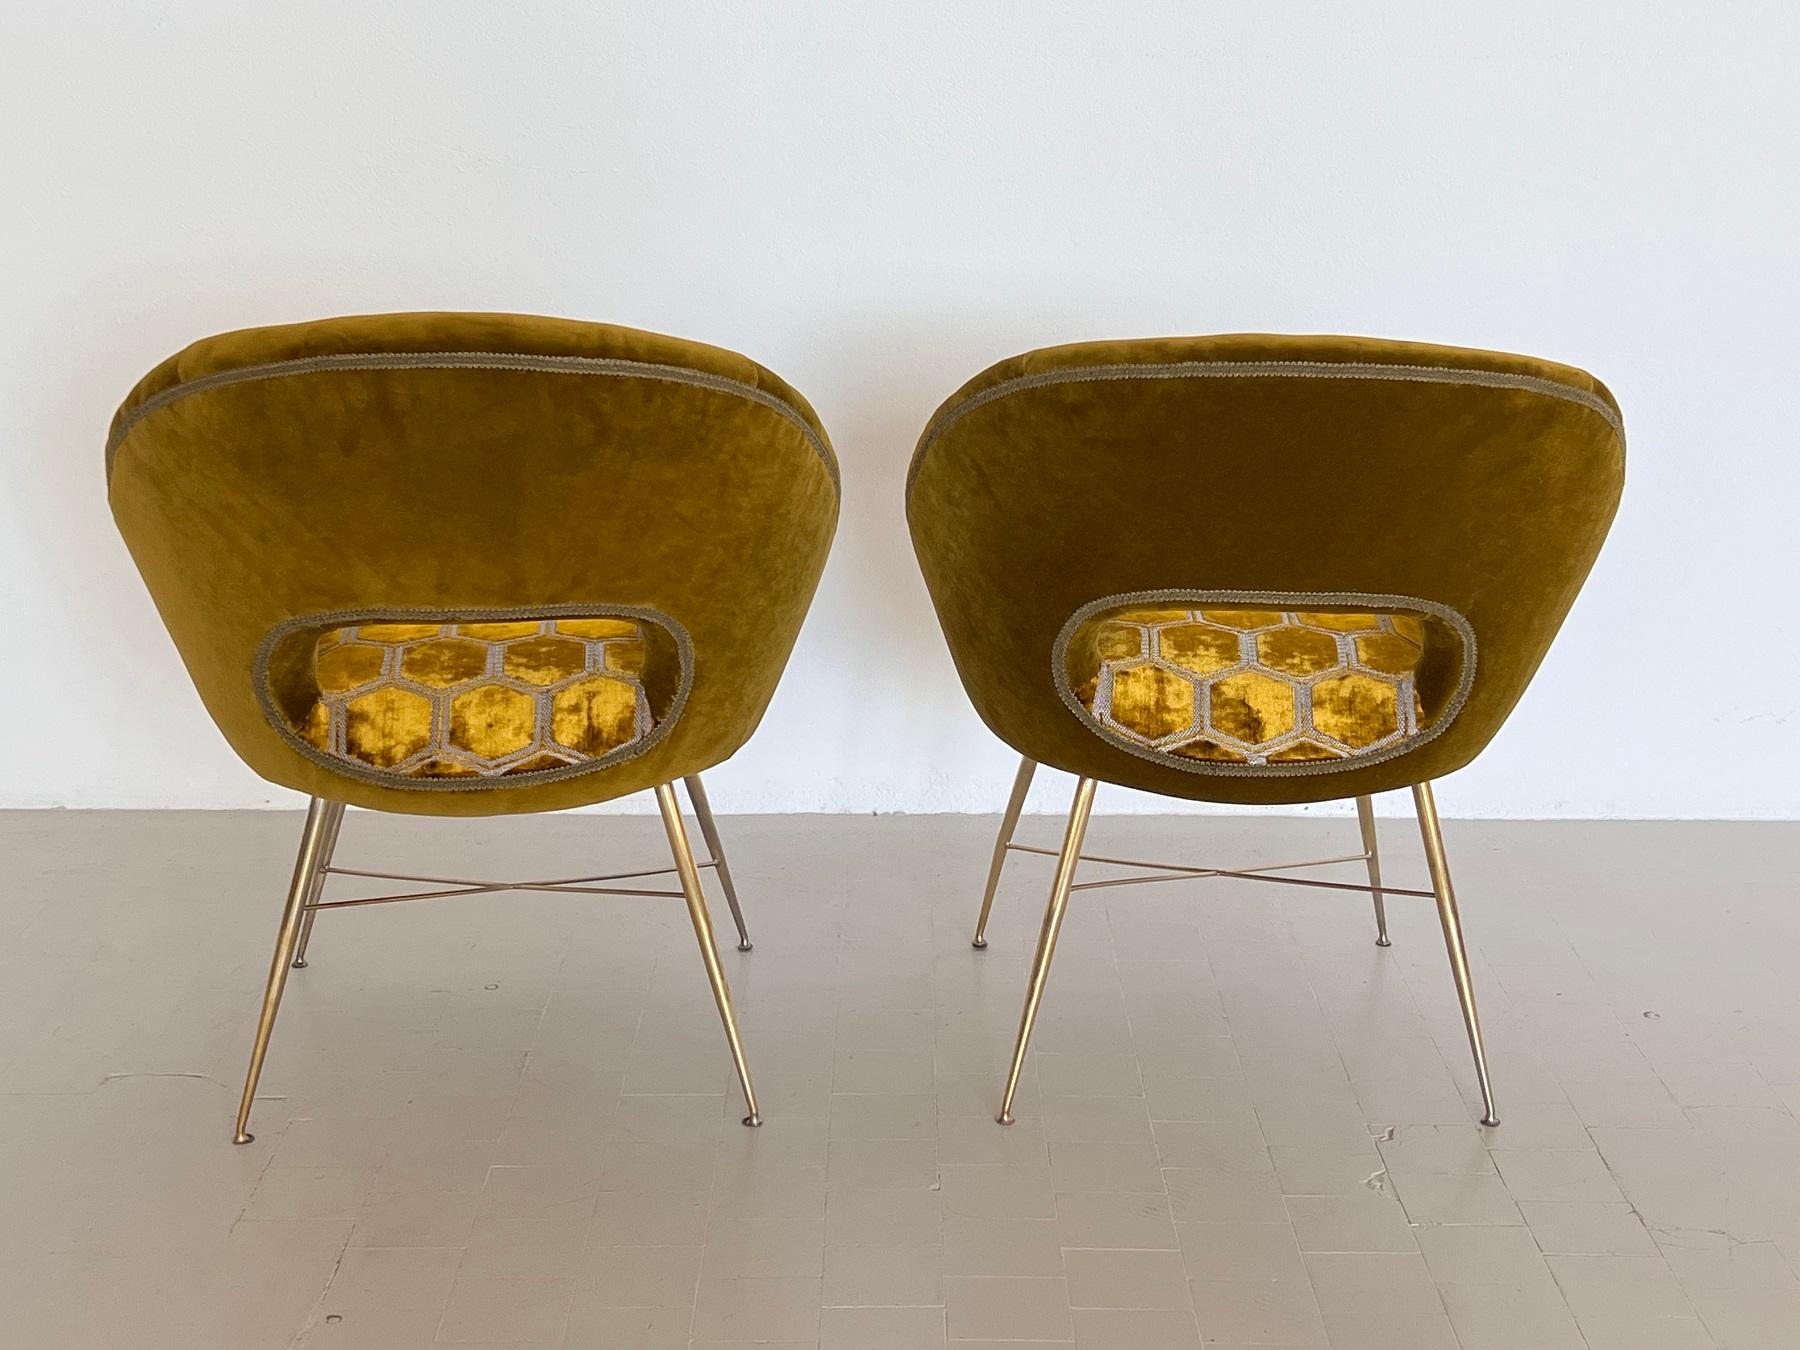 Silvio Cavatorta Pair of Chairs with Brass Legs Re-upholstered in Velvet, 1950s For Sale 2